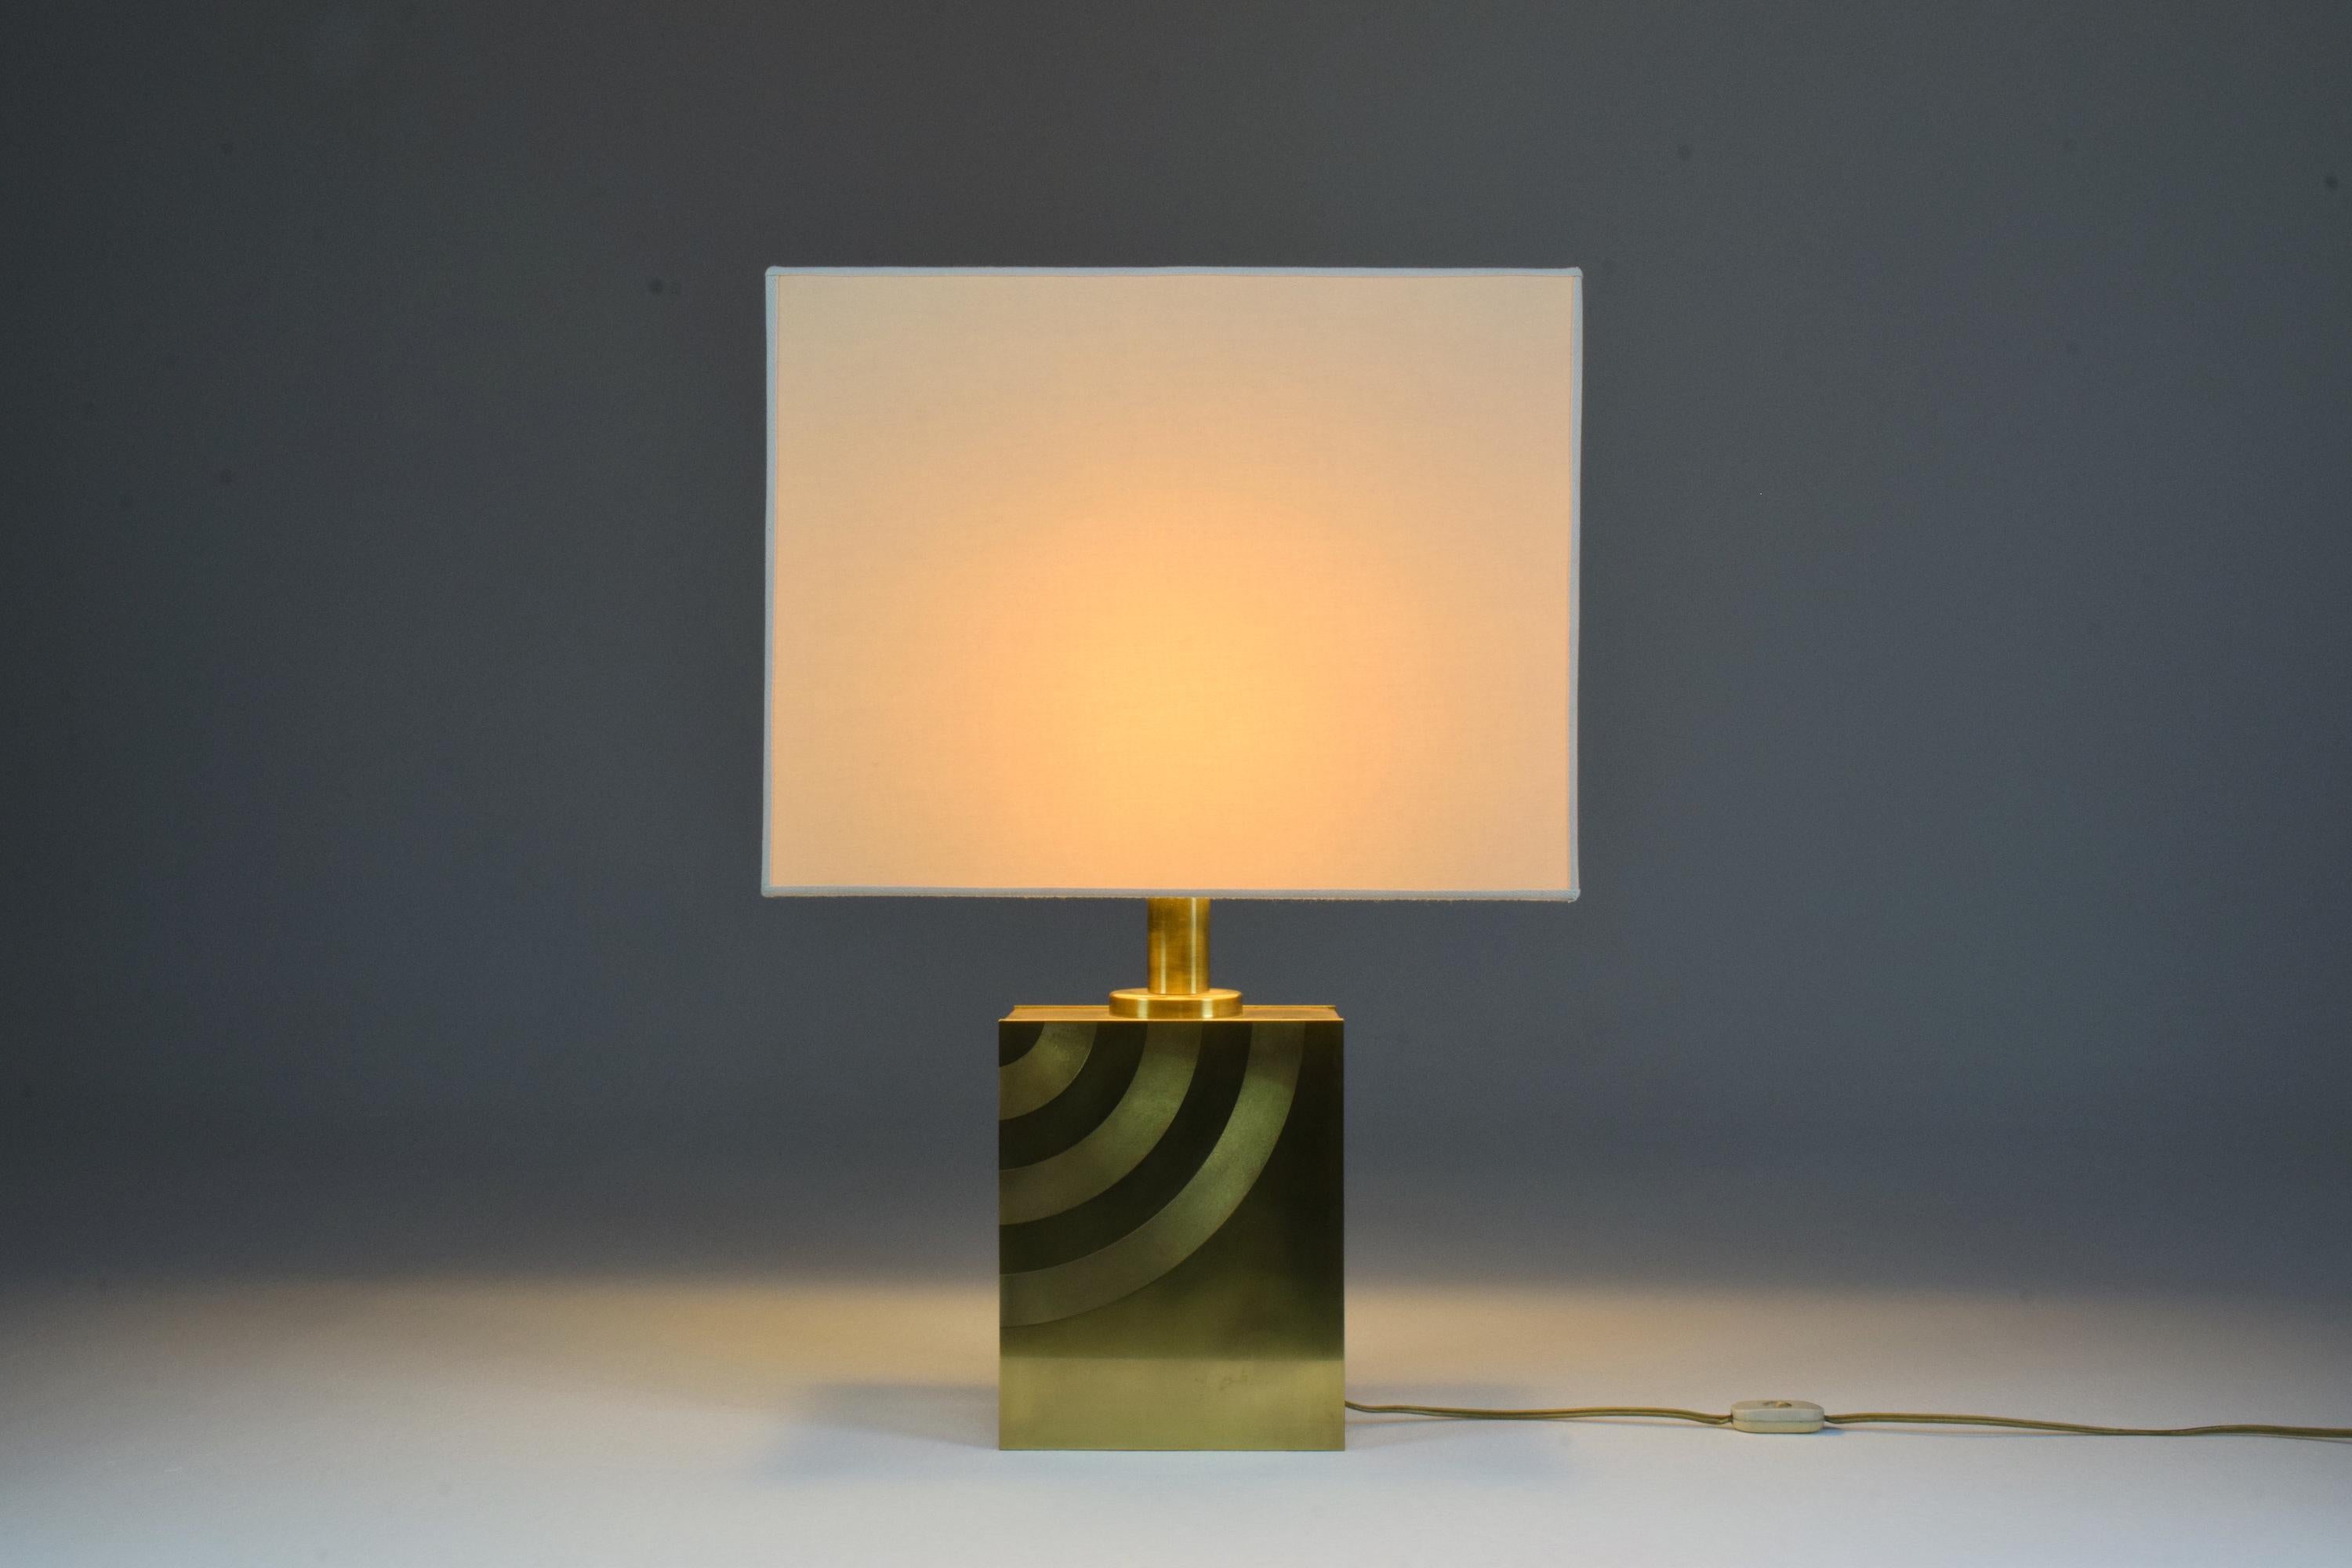 A majestic Italian vintage rectangular table lamp from the 1970s in solid gold polished brass with beautiful graphic engravings. Restored with a new fabric lampshade in the same style as the original used one, paying homage to its timeless design.